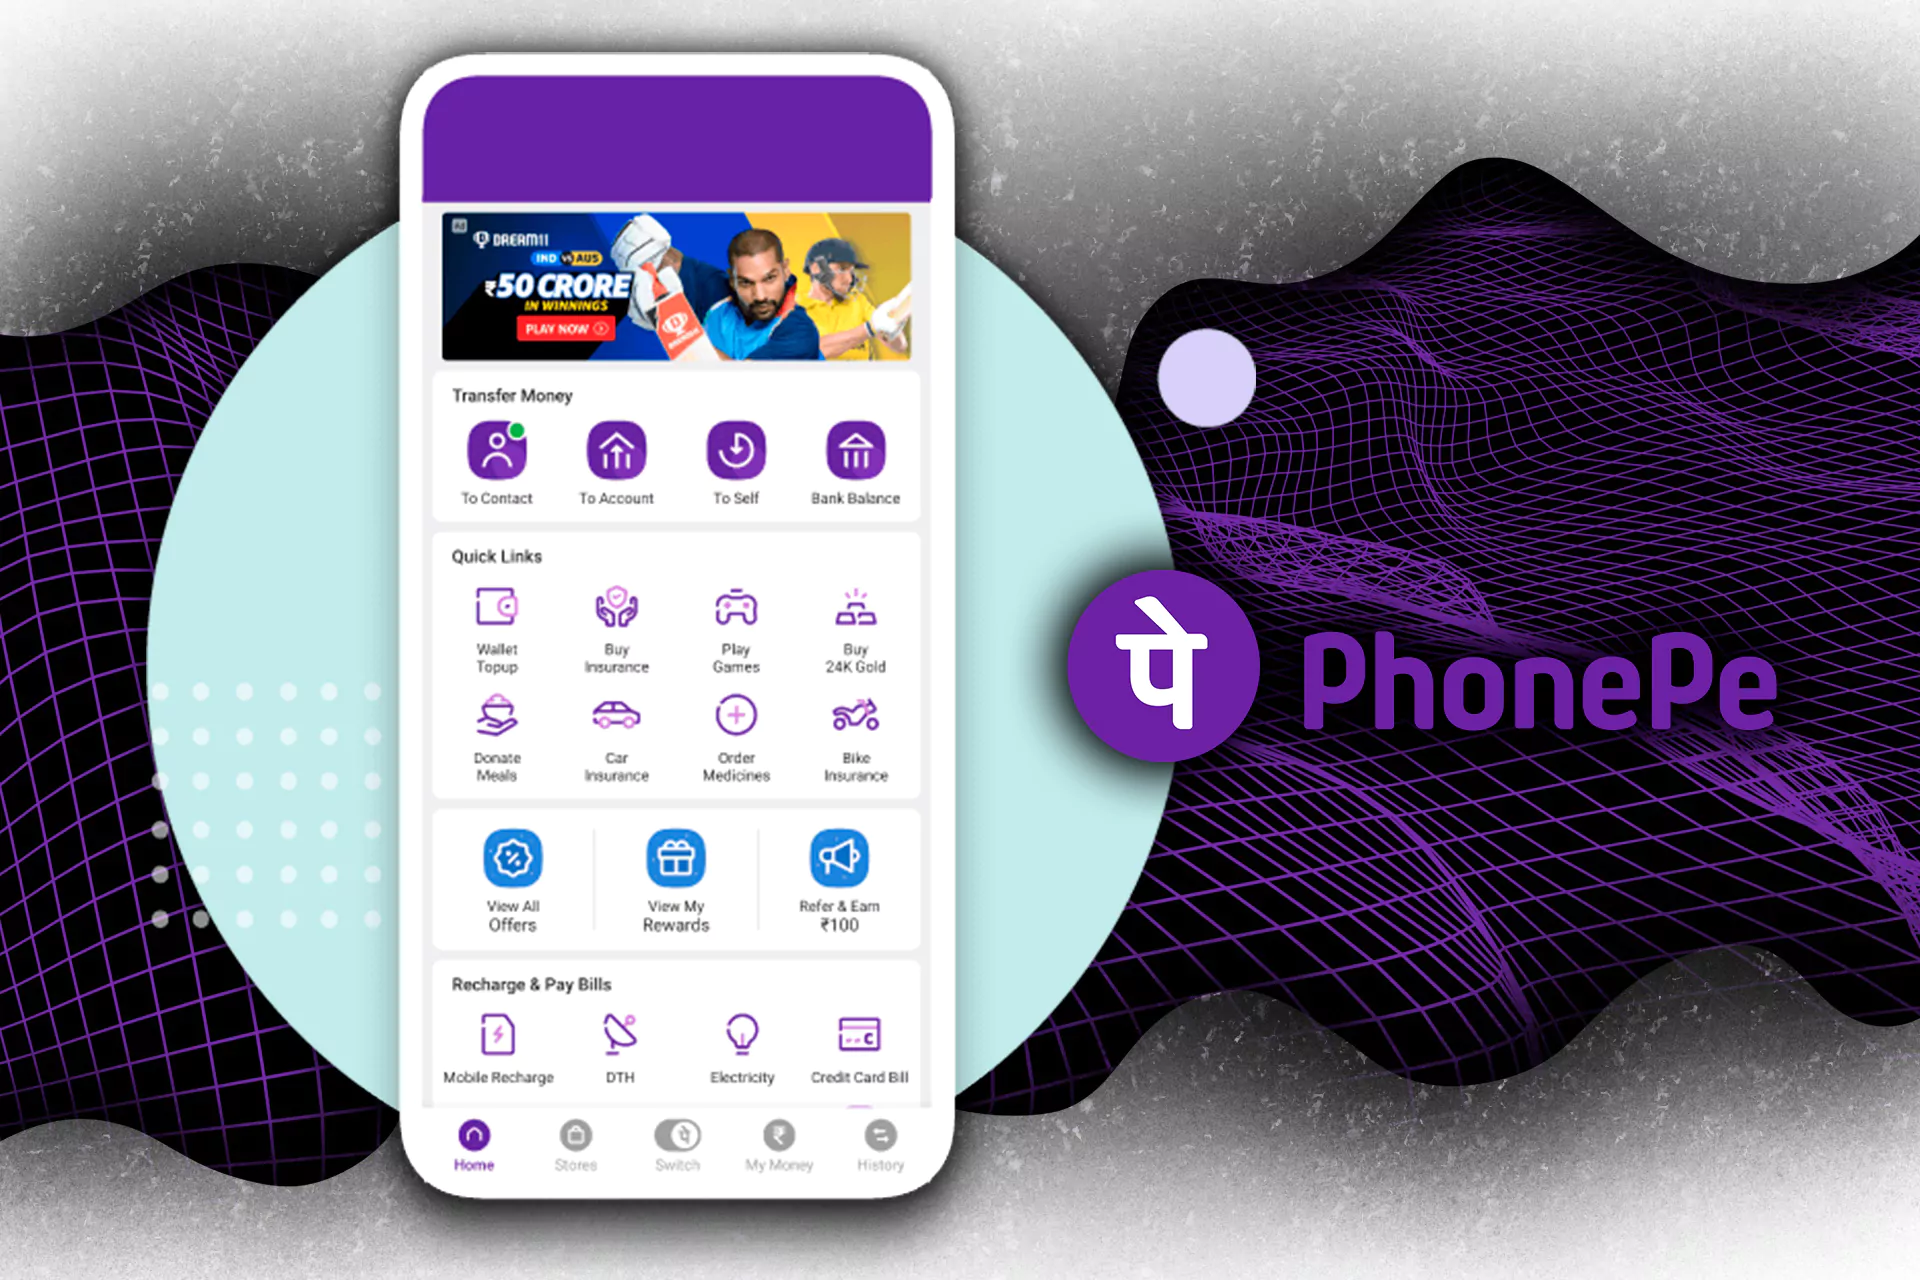 PhonePe is a wallet for electronic payments.